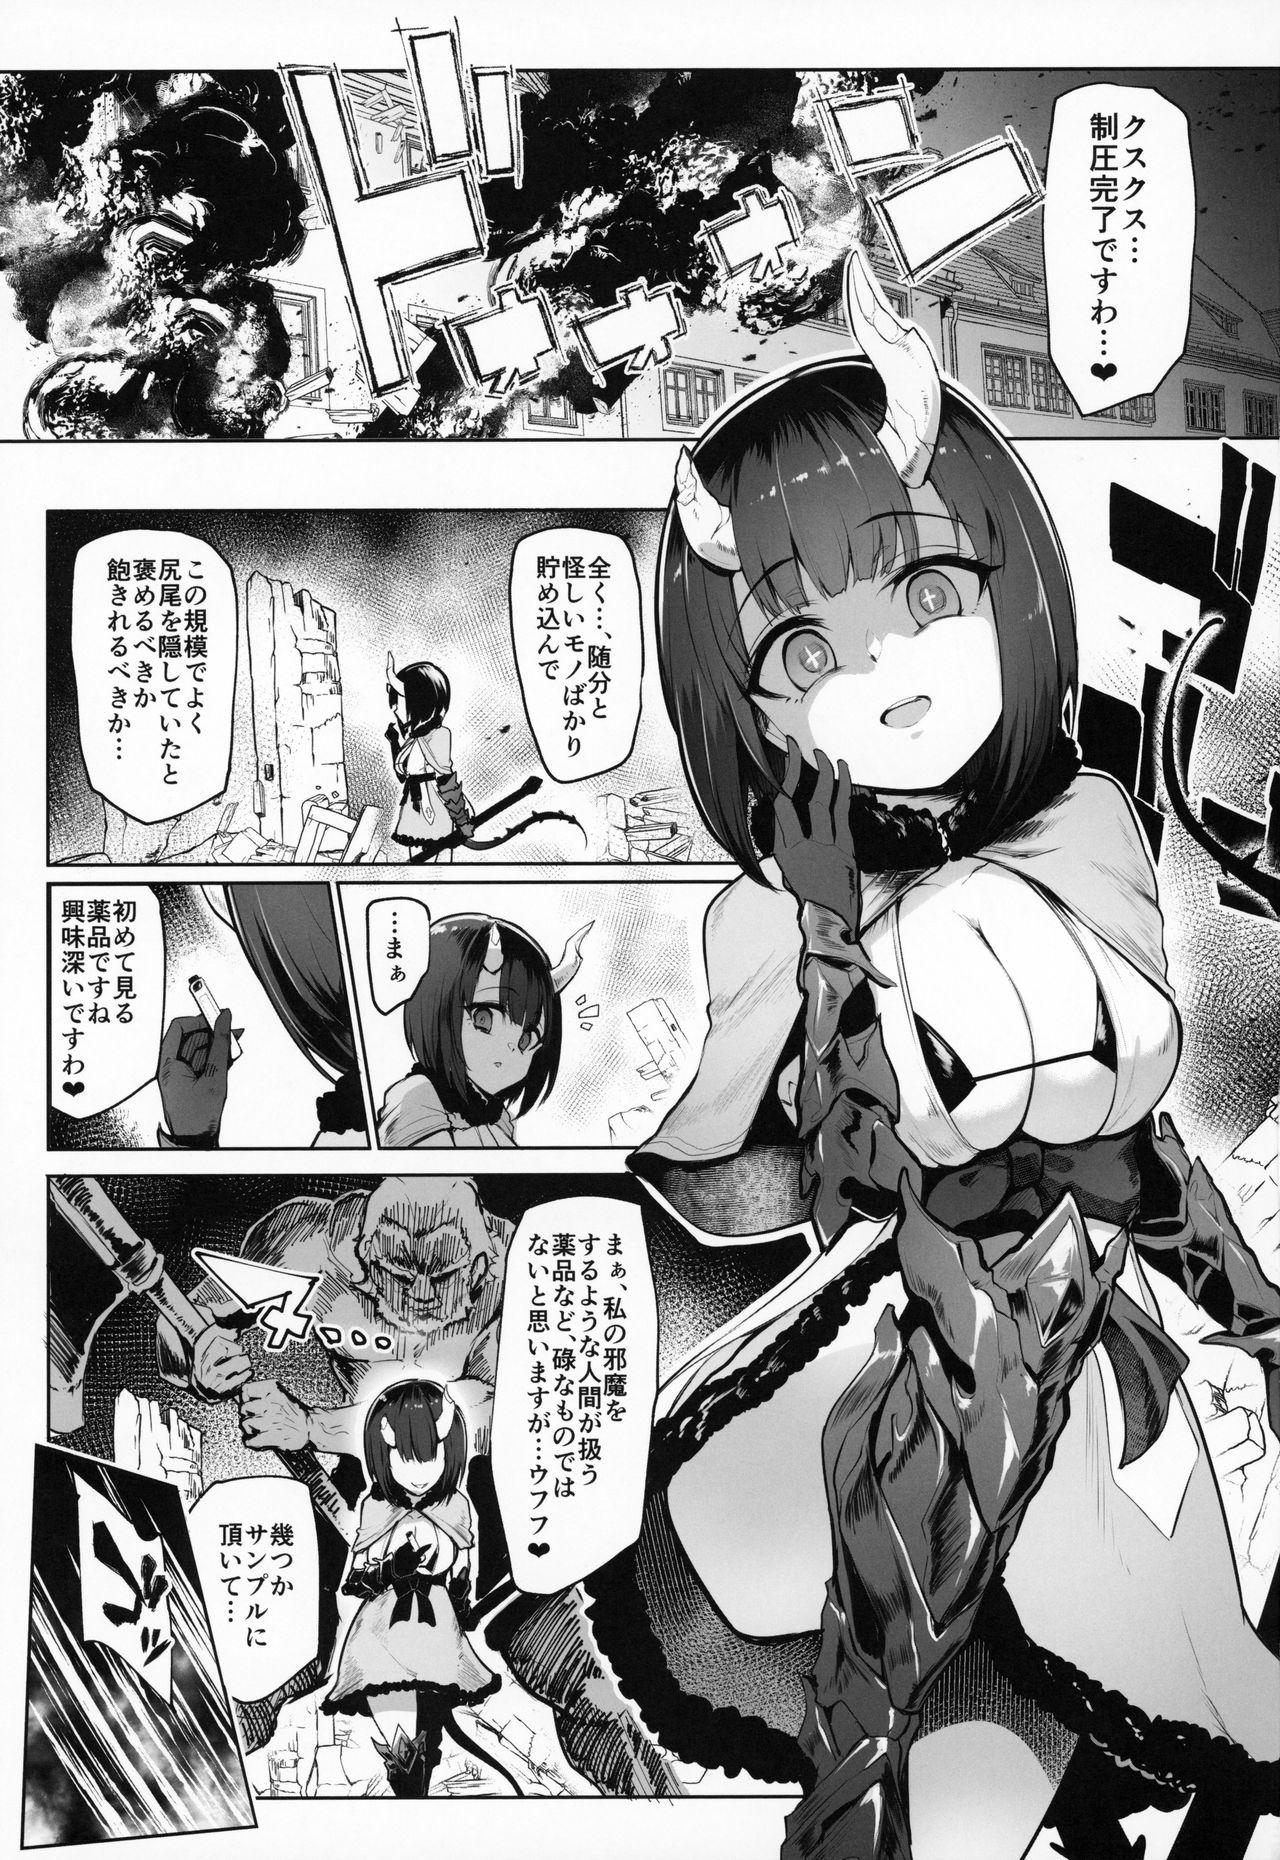 Italian DESTROYER DESTROYER - Princess connect Tamil - Page 2